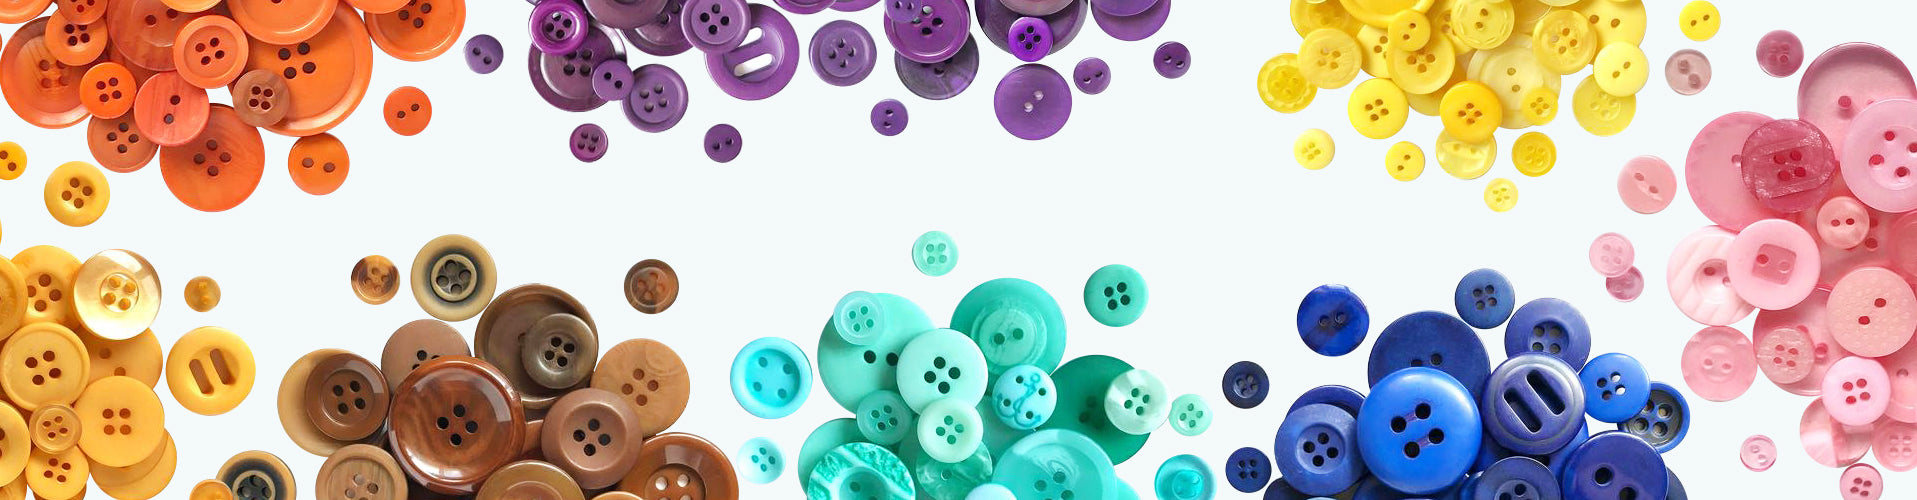 Craft and Sewing Buttons by the Pound | Buttons Galore and More